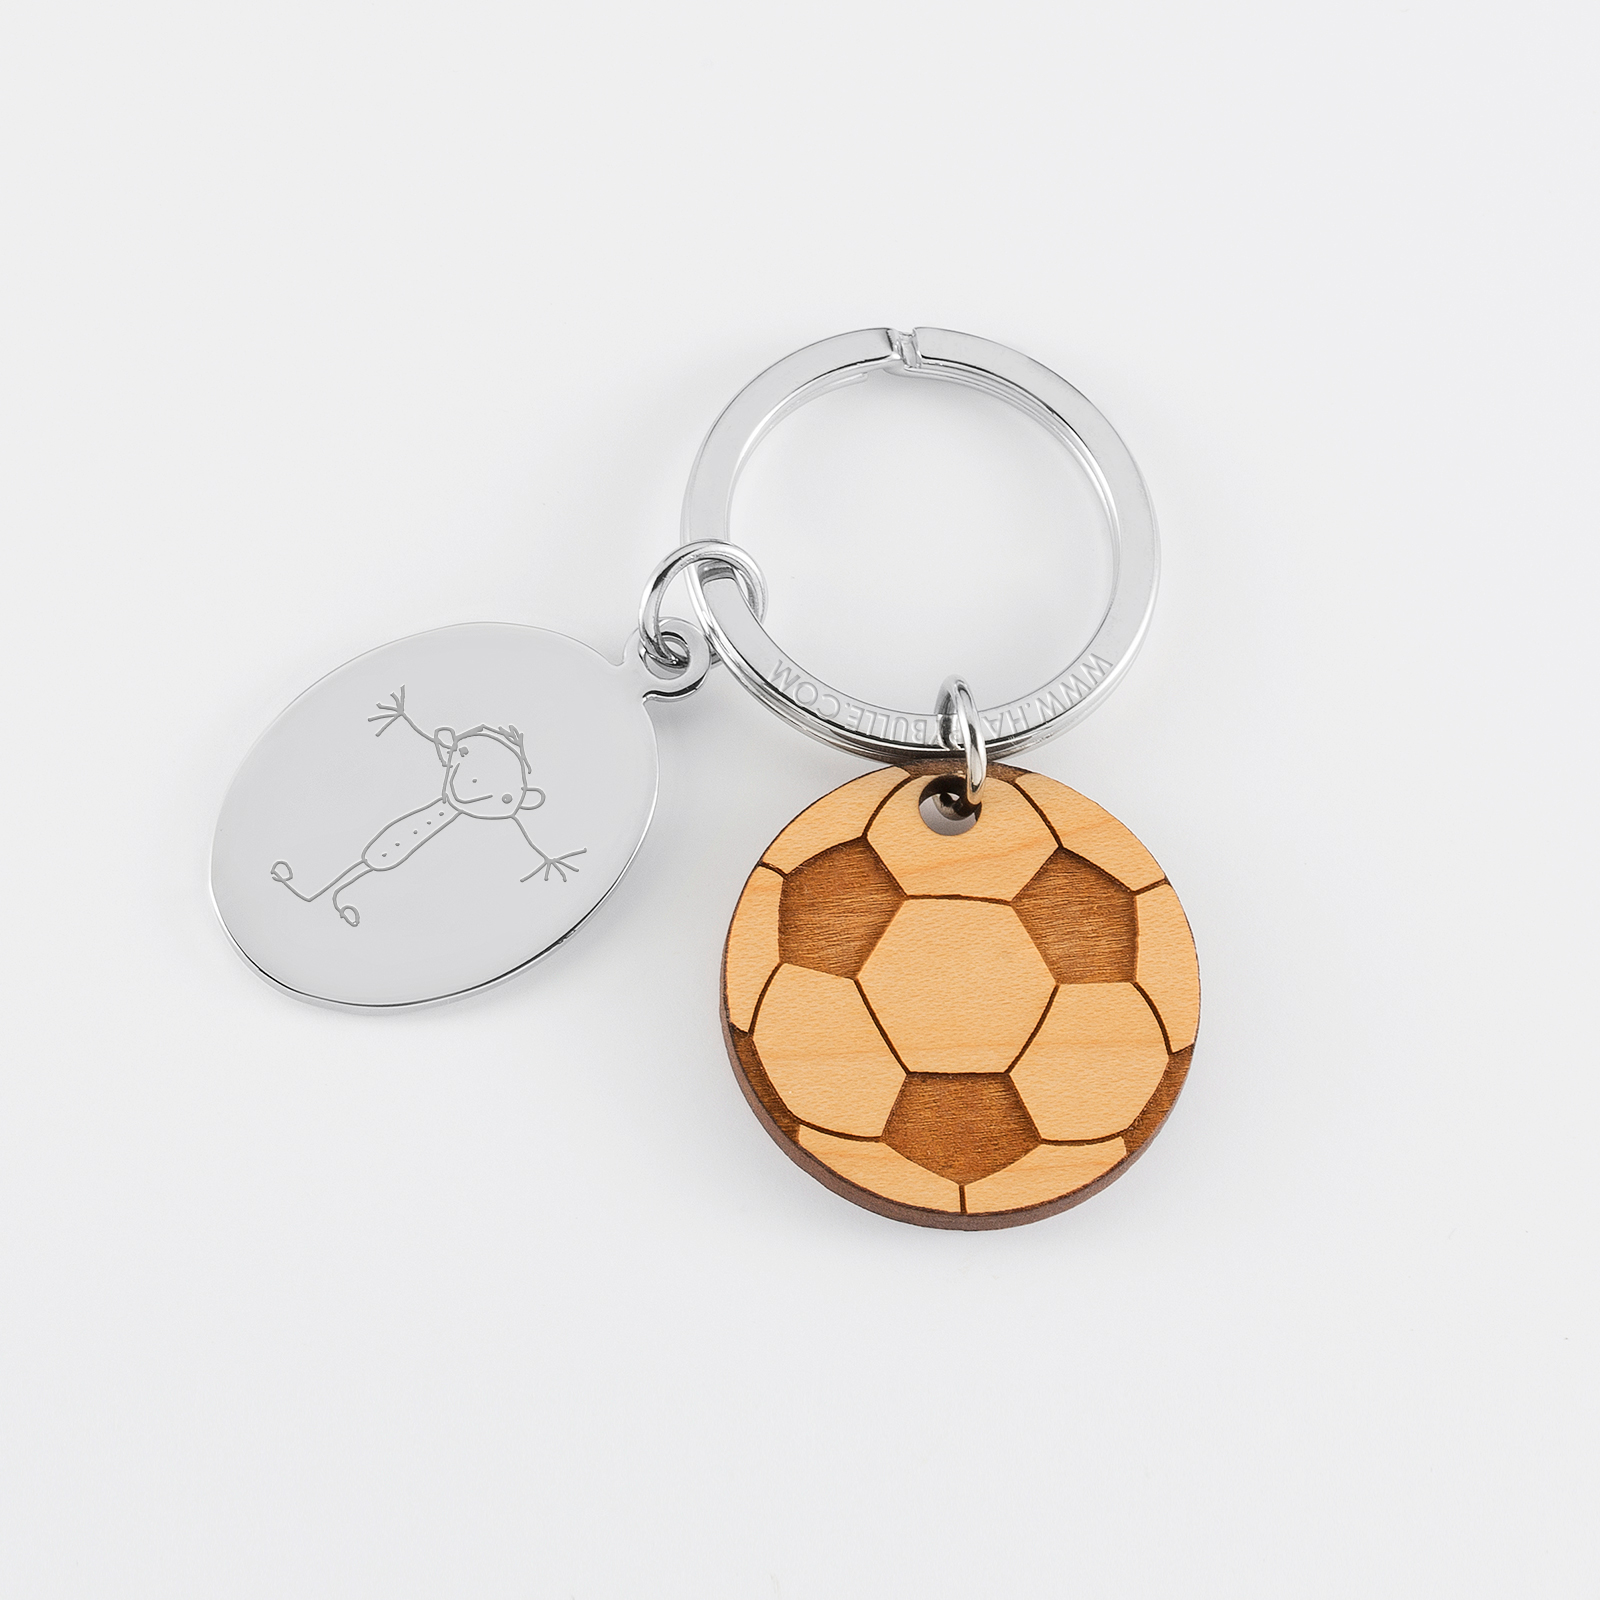 Personalised engraved oval steel medallion and wooden football charm keyring - sketch